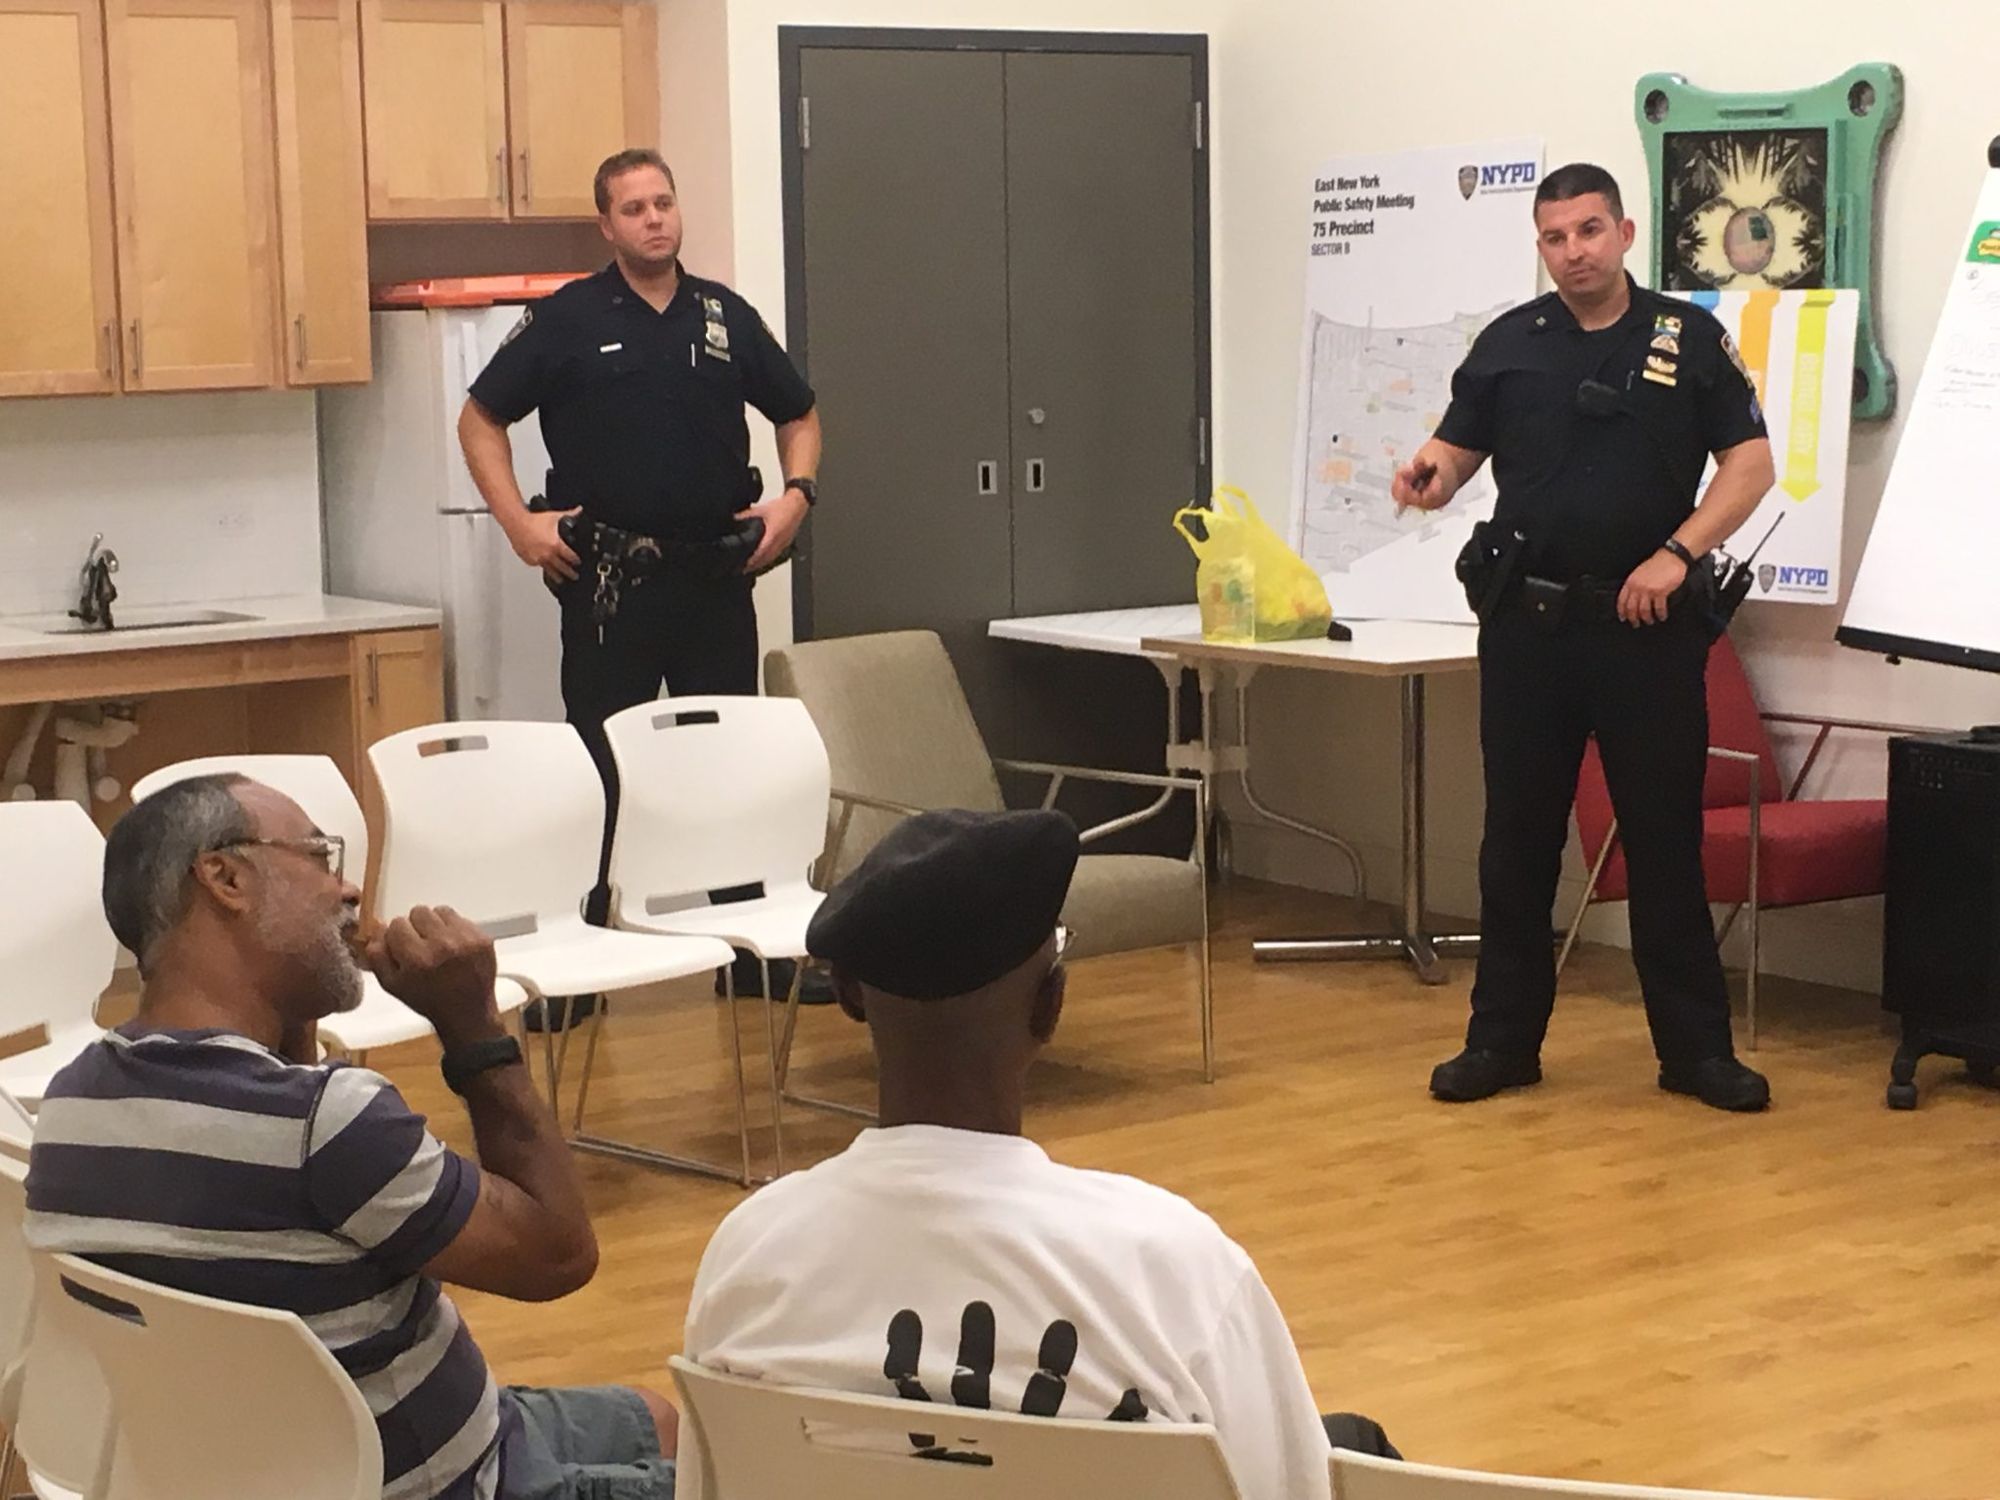 Report from the 75th Precinct Fall NCO Safety Meeting, East New York, Sector B